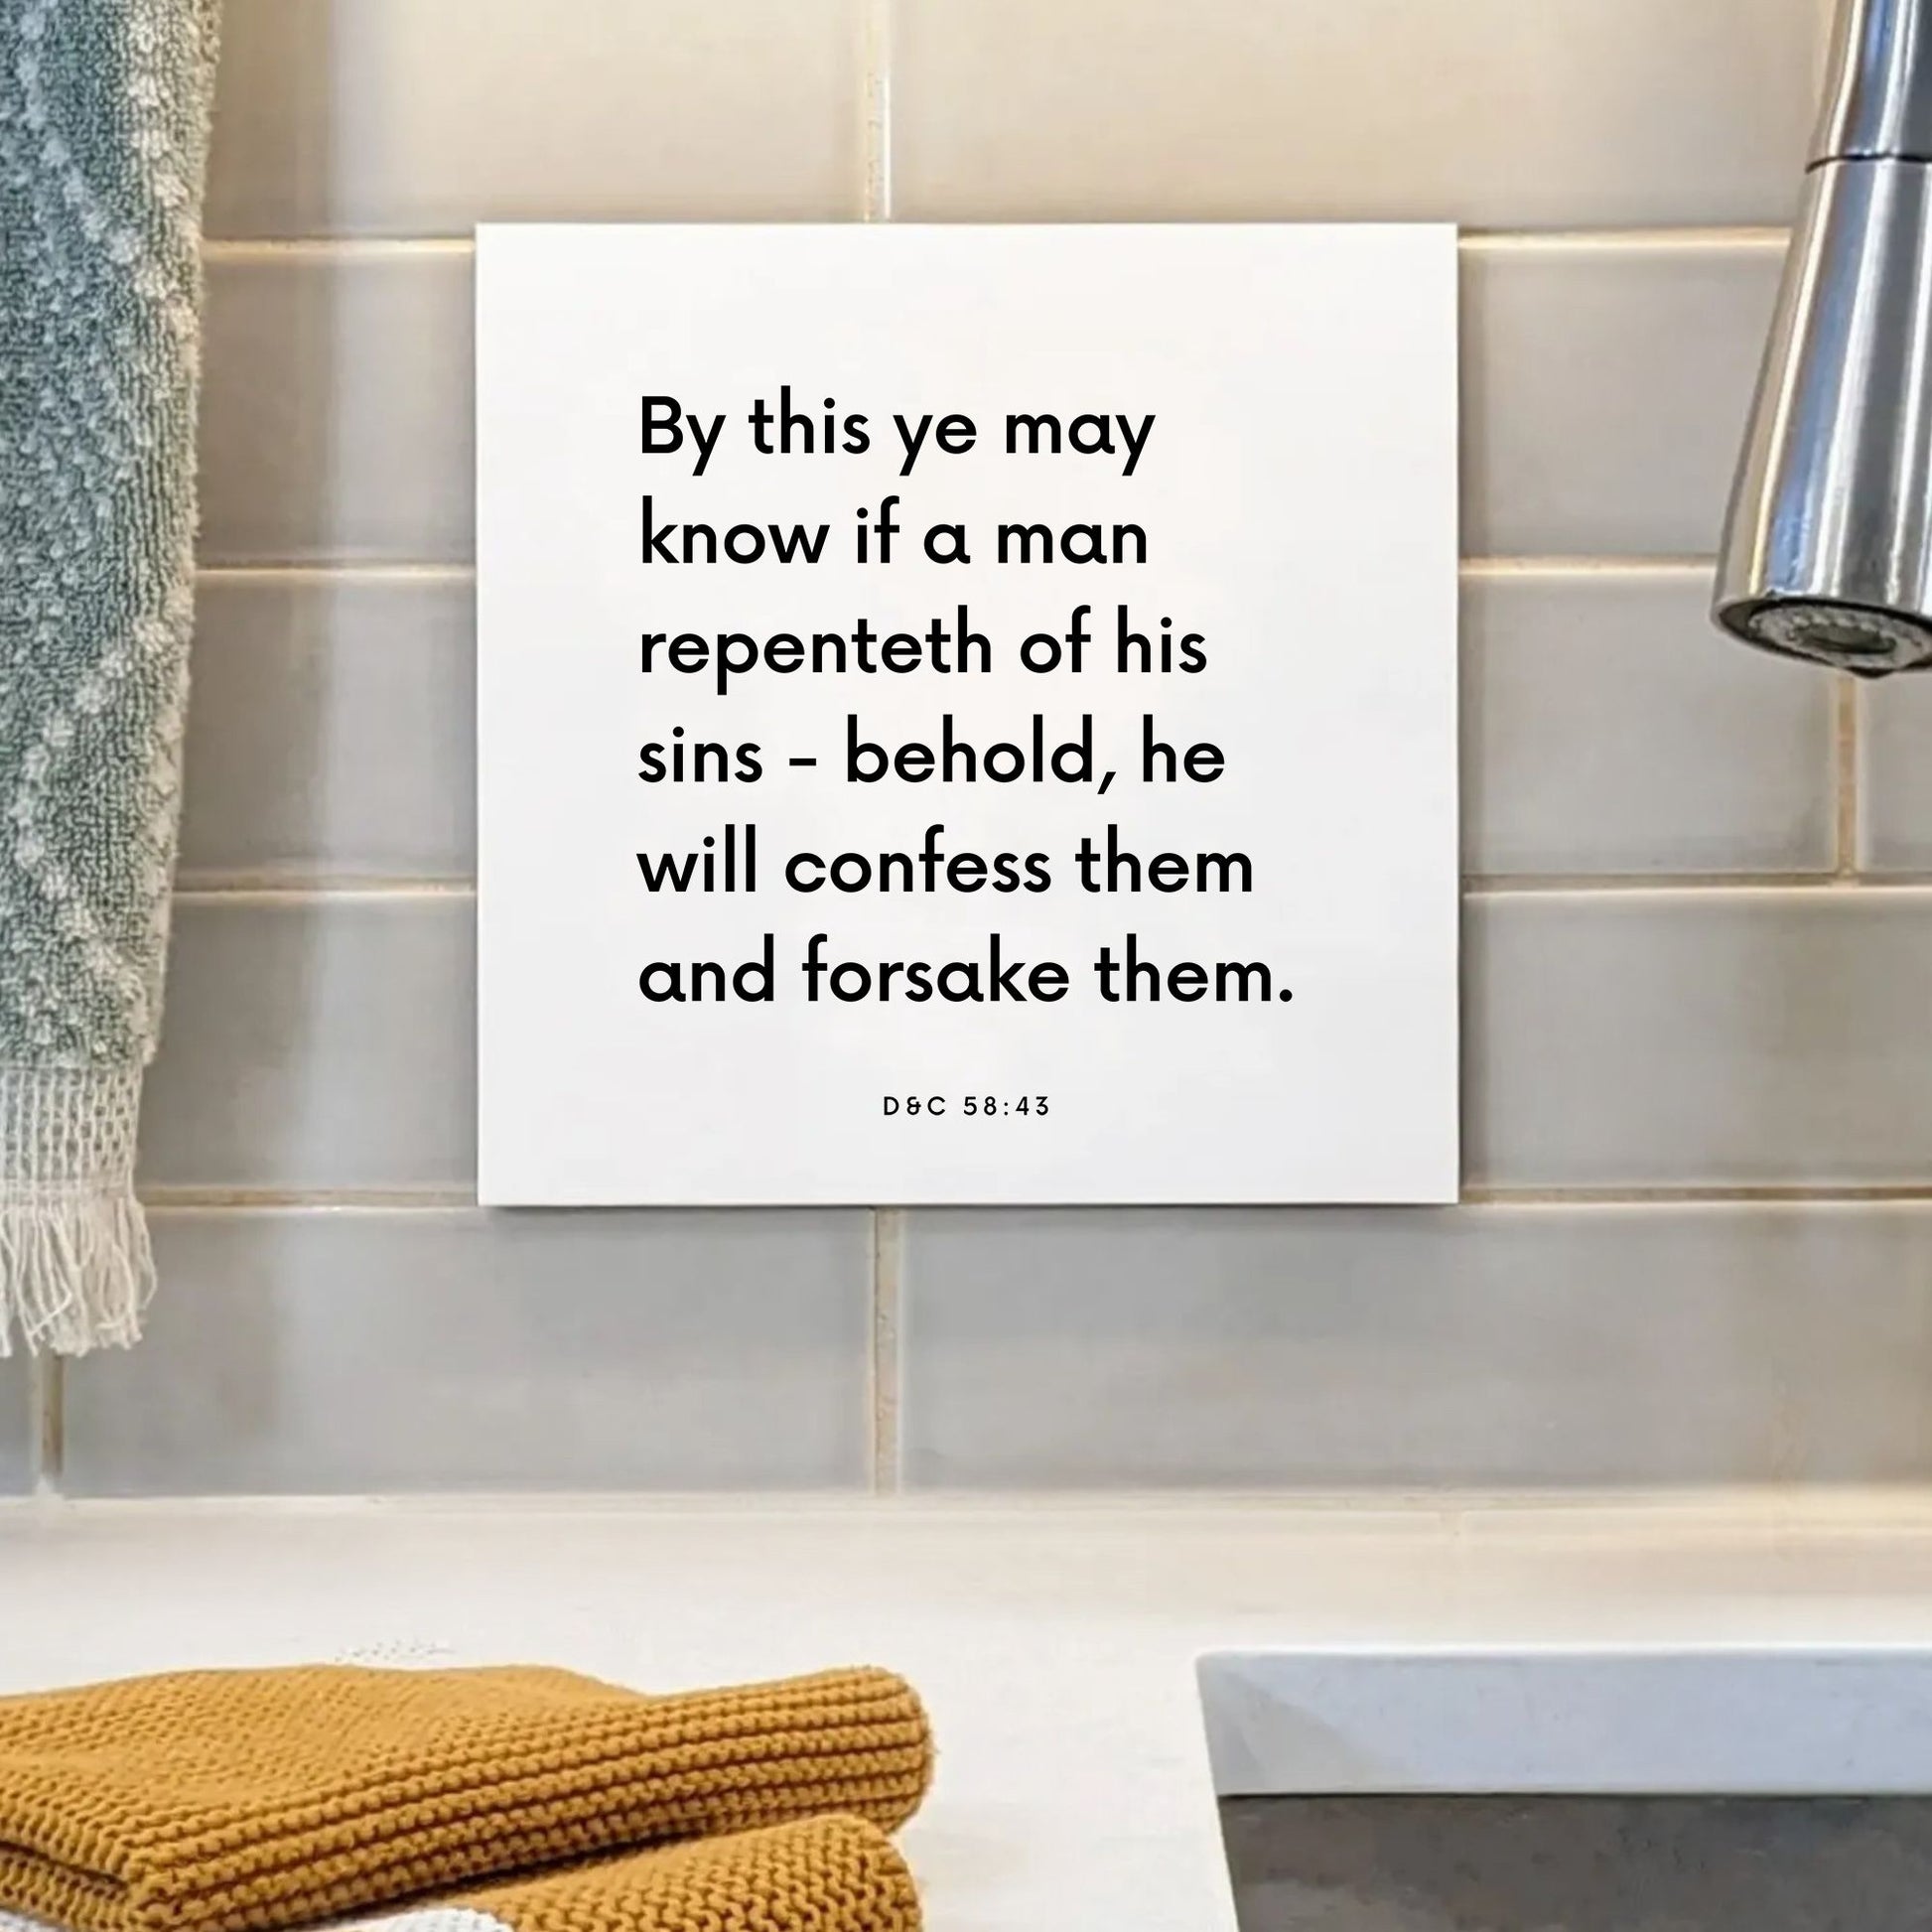 Sink mouting of the scripture tile for D&C 58:43 - "By this ye may know if a man repenteth of his sins"